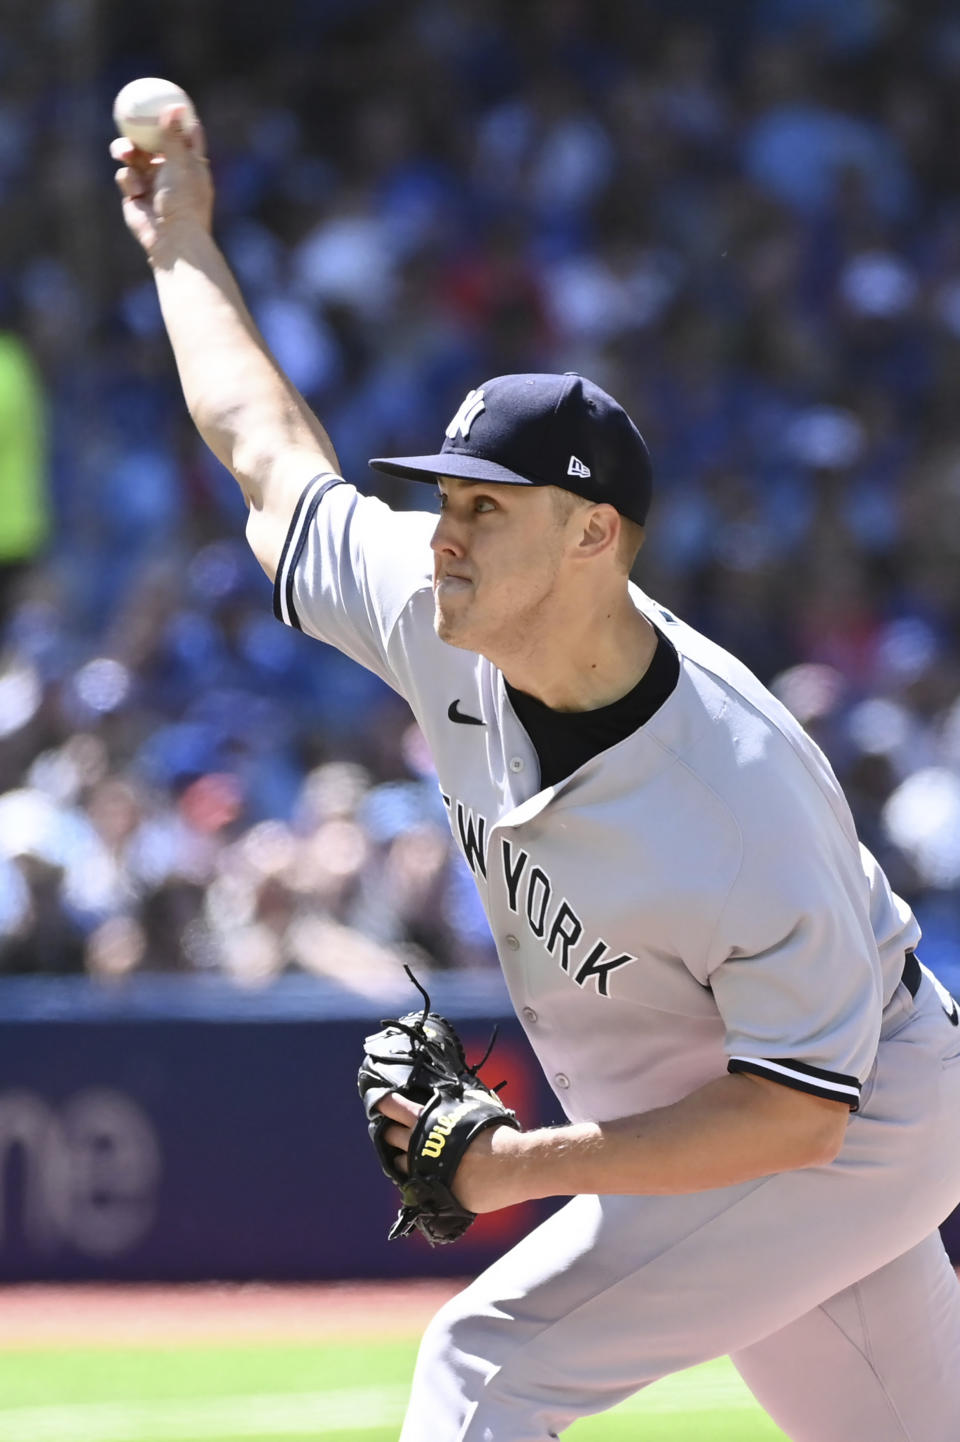 New York Yankees starting pitcher Jameson Taillon throws to a Toronto Blue Jays batter in the first inning of a baseball game in Toronto, Saturday, June 18, 2022. (Jon Blacker/The Canadian Press via AP)